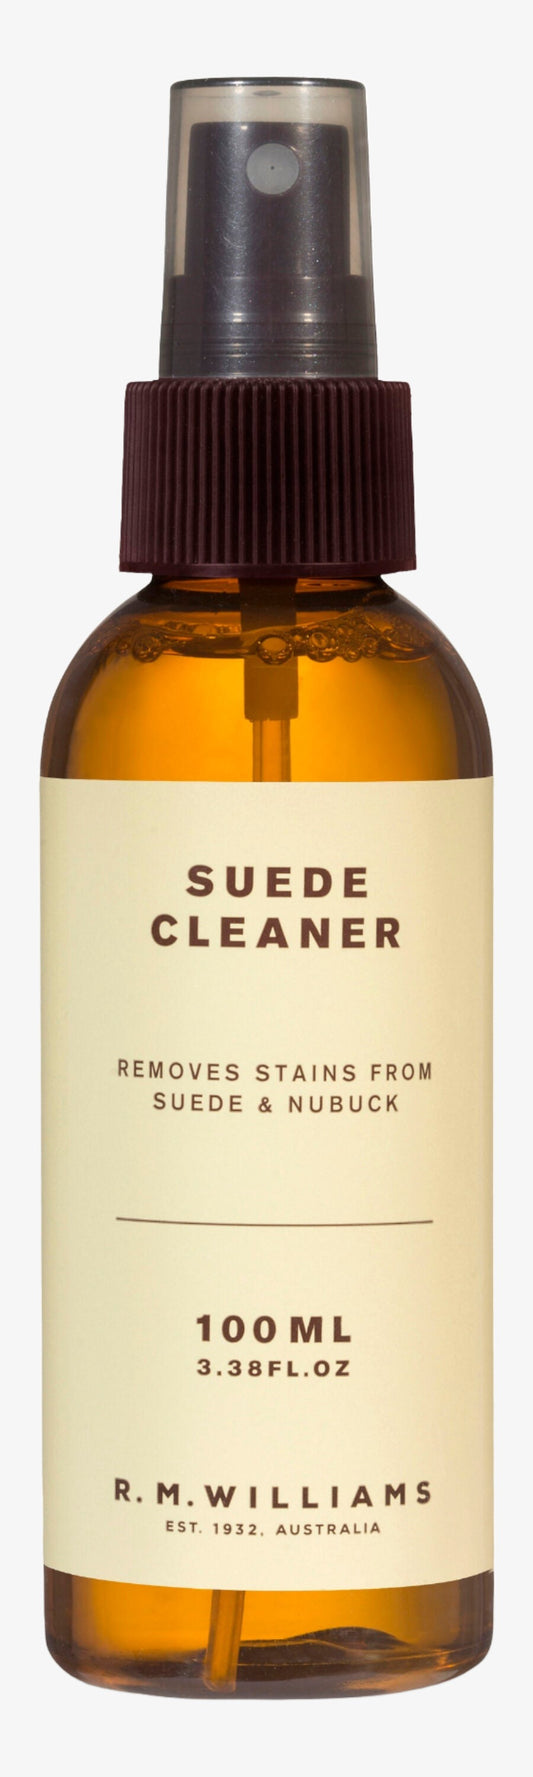 Suede cleaner Boot Cleaner R.M. WILLIAMS